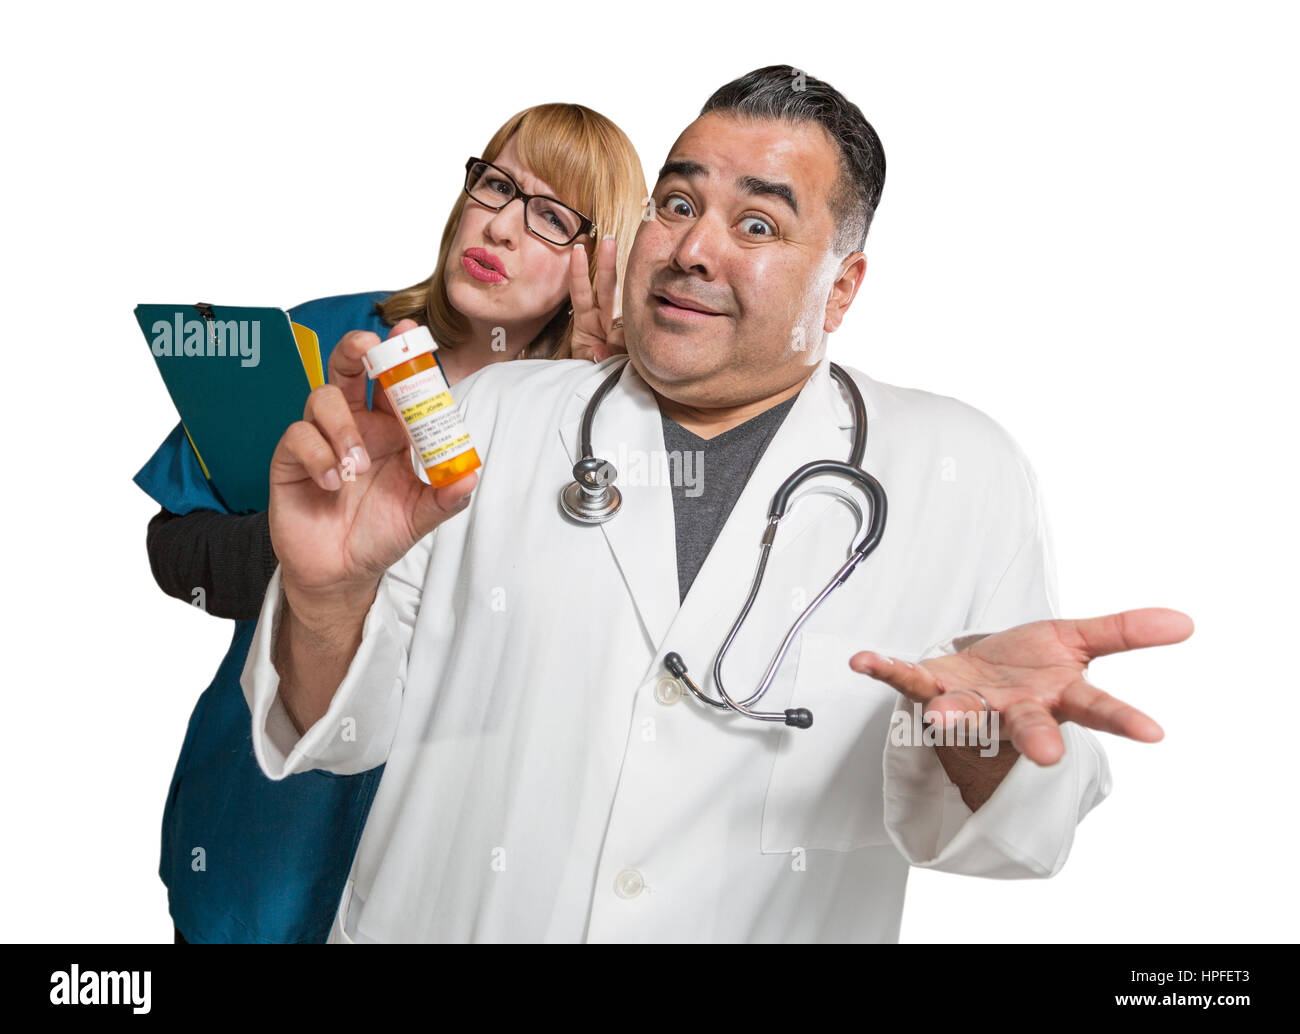 Goofy Doctor and Nurse with Prescription Bottle Isolated on a White Background. Stock Photo